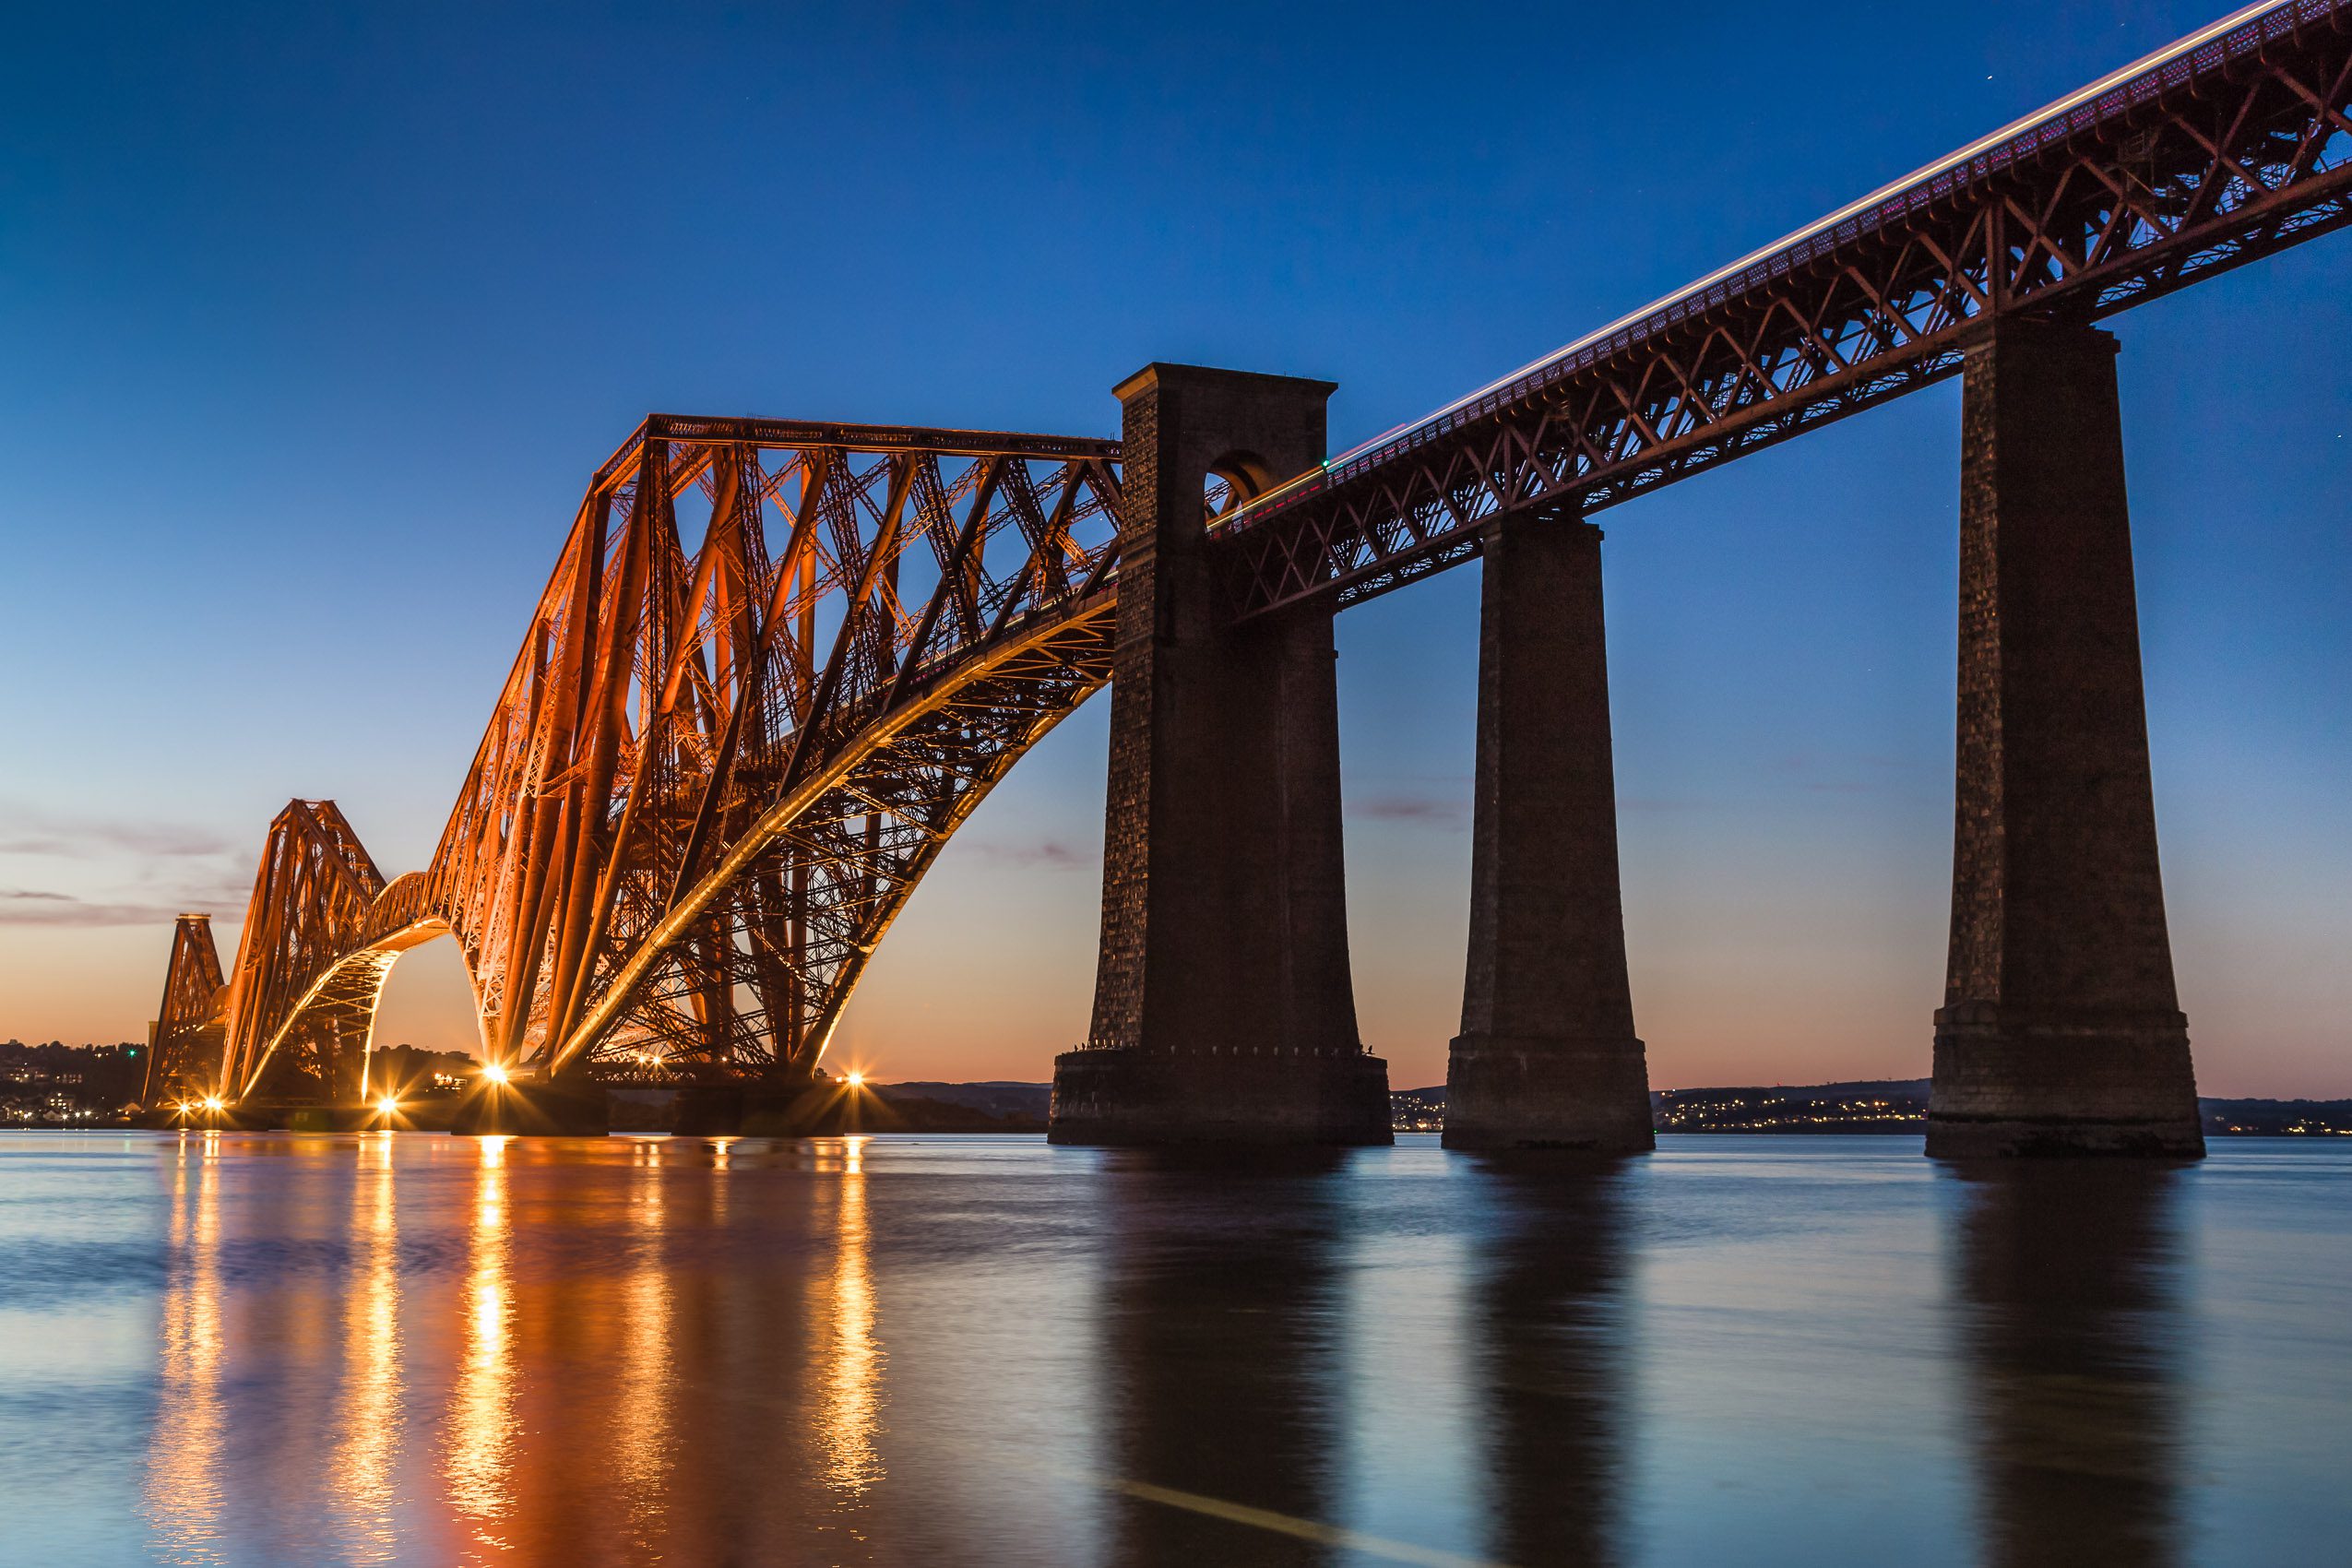 The Forth Rail Bridge at dusk from South Queensferry, West Lothian, Scotland, United Kingdom. FB009